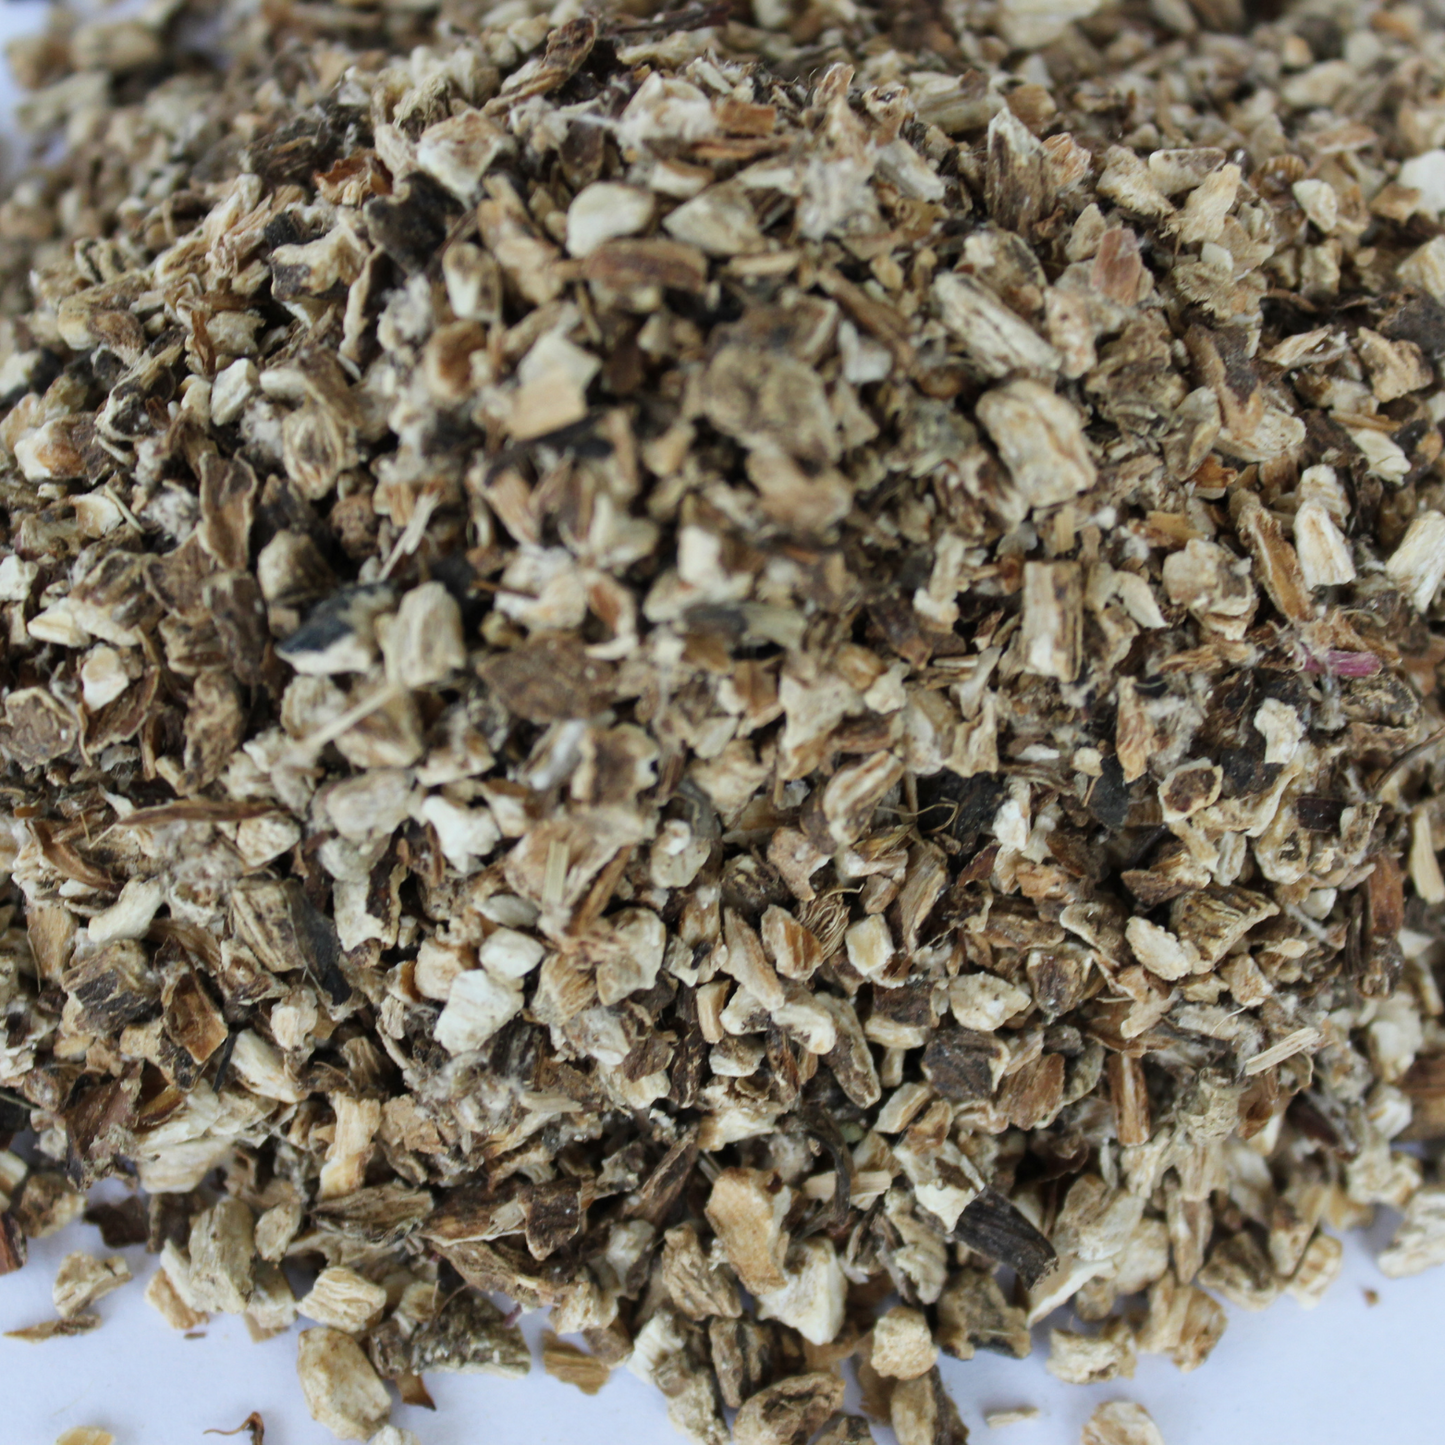 Ashwagandha Root, Pieces of Root, Dried Herbs, Food Grade Herbs, Herbs and Spices, Loose Leaf Herbs